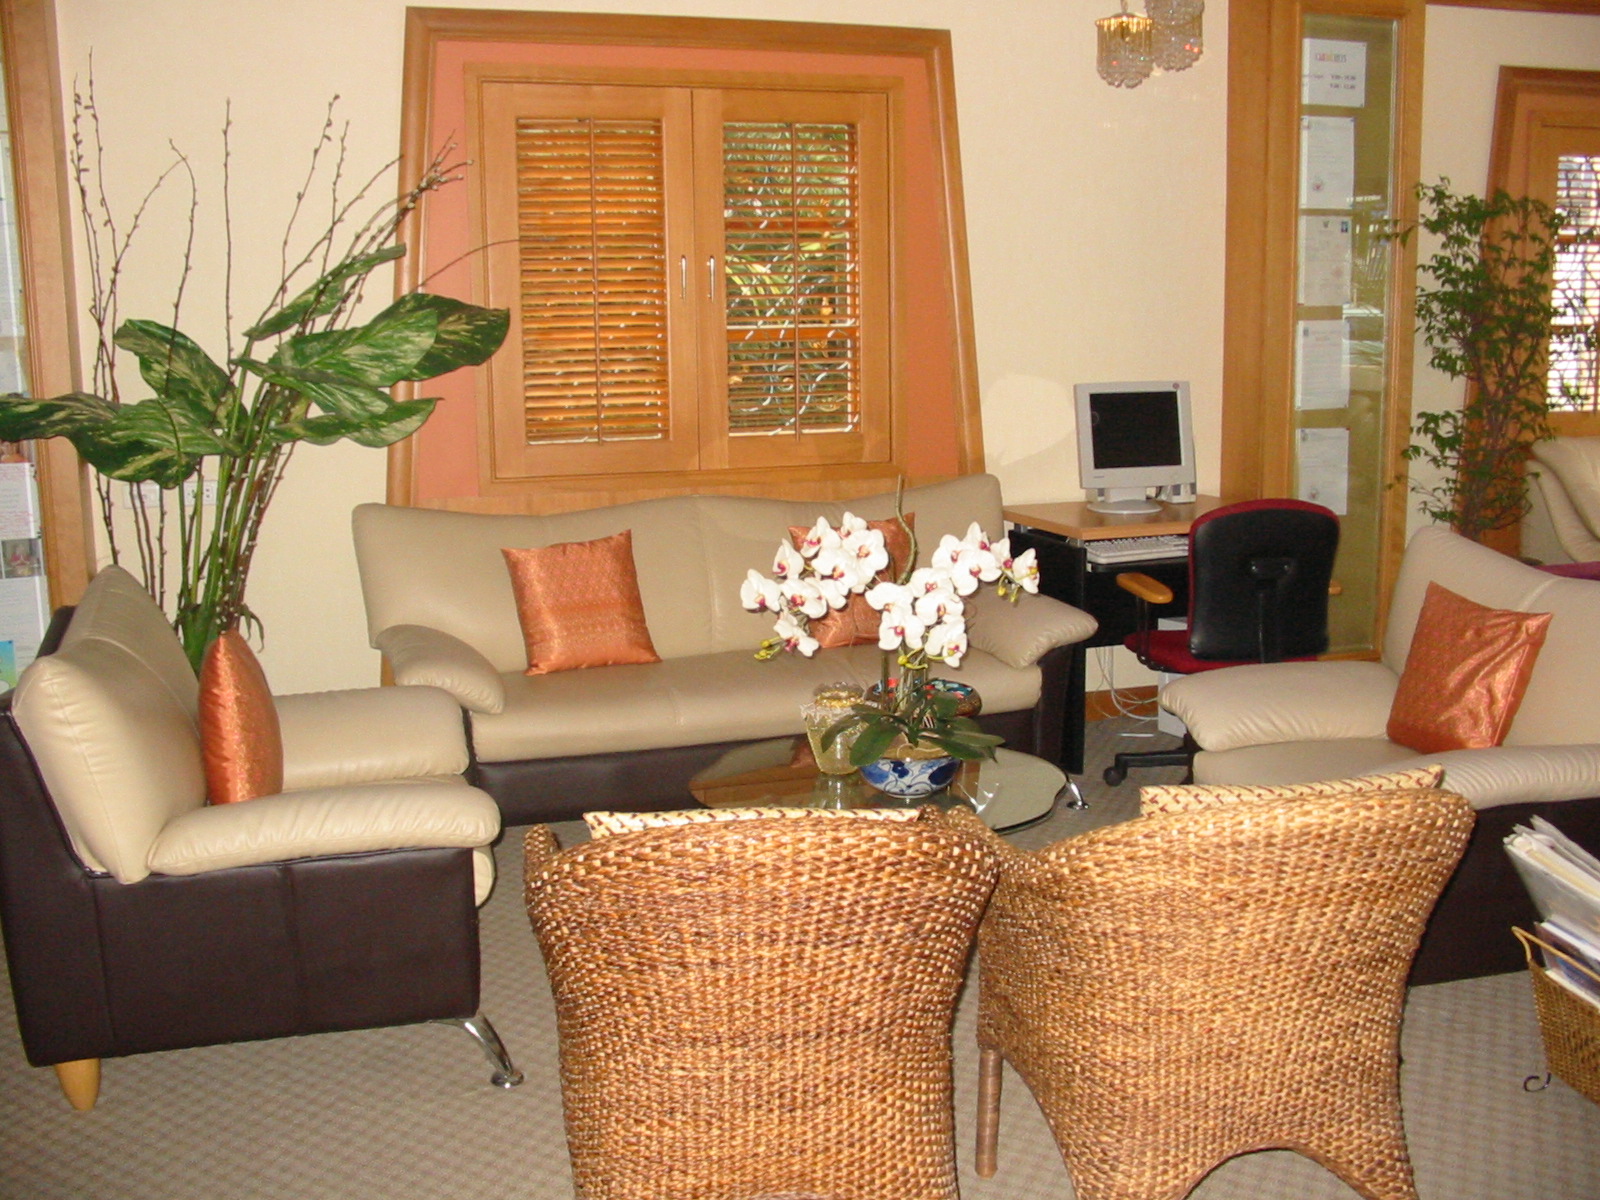 The waiting/recreation area within the clinic